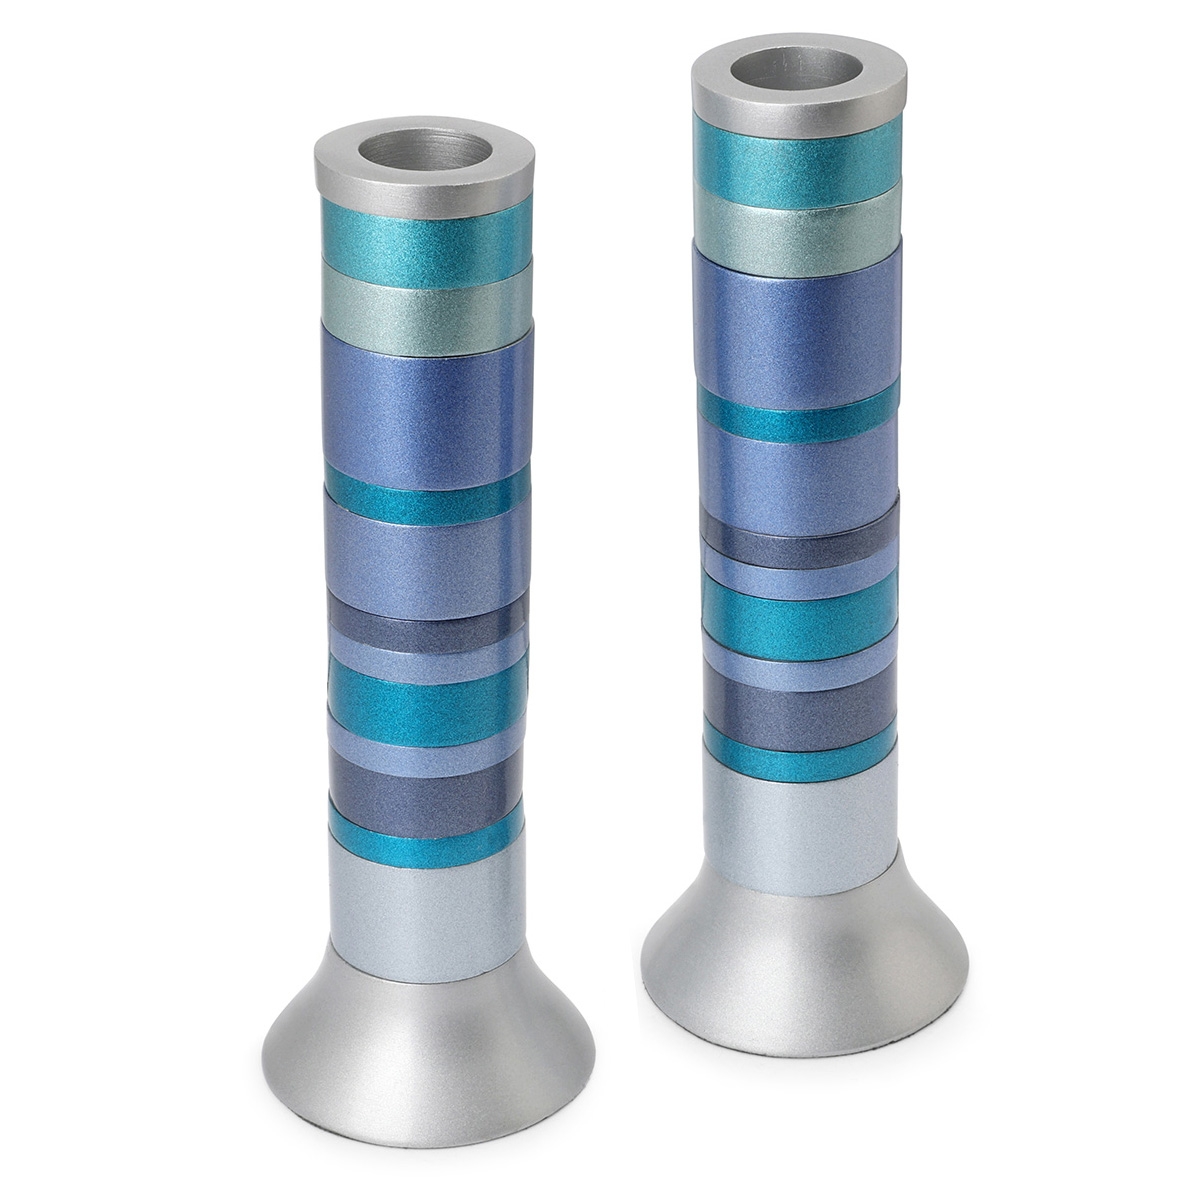 Yair Emanuel Aluminum Stacked Ring Candlesticks - Choice of Colors - 1